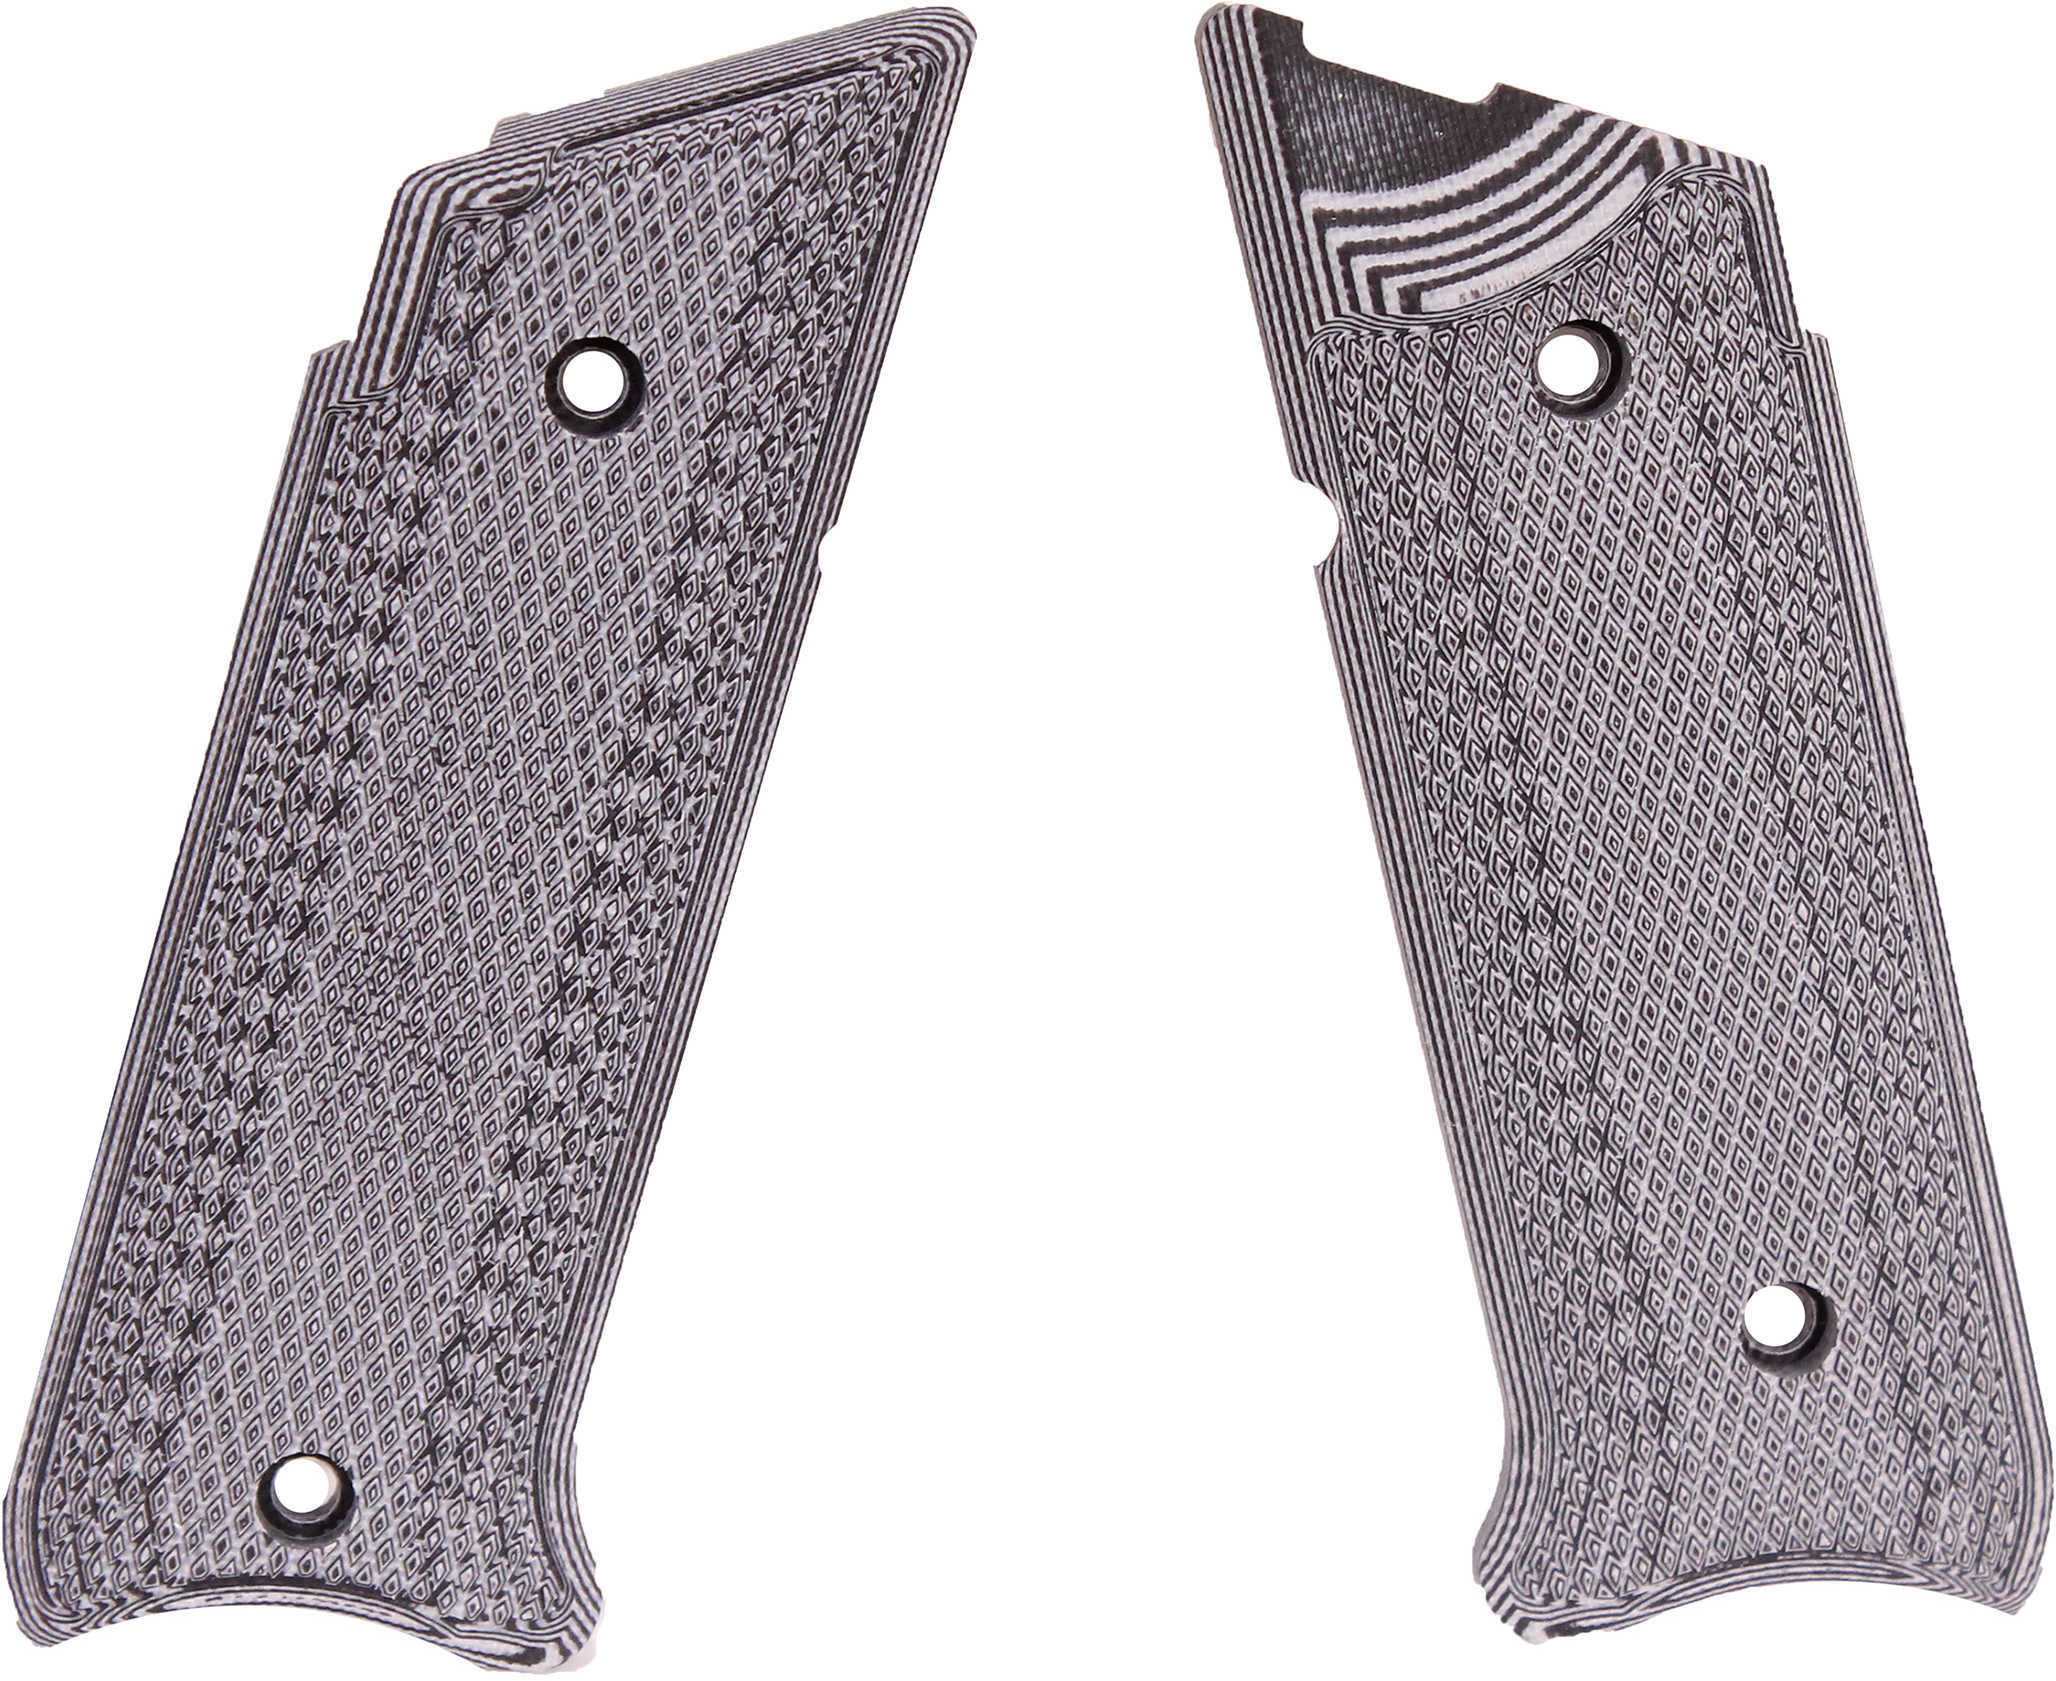 Pachmayr 61076 G10 Tactical Pistol Grip Ruger® MKIV Checkered Gray/Black